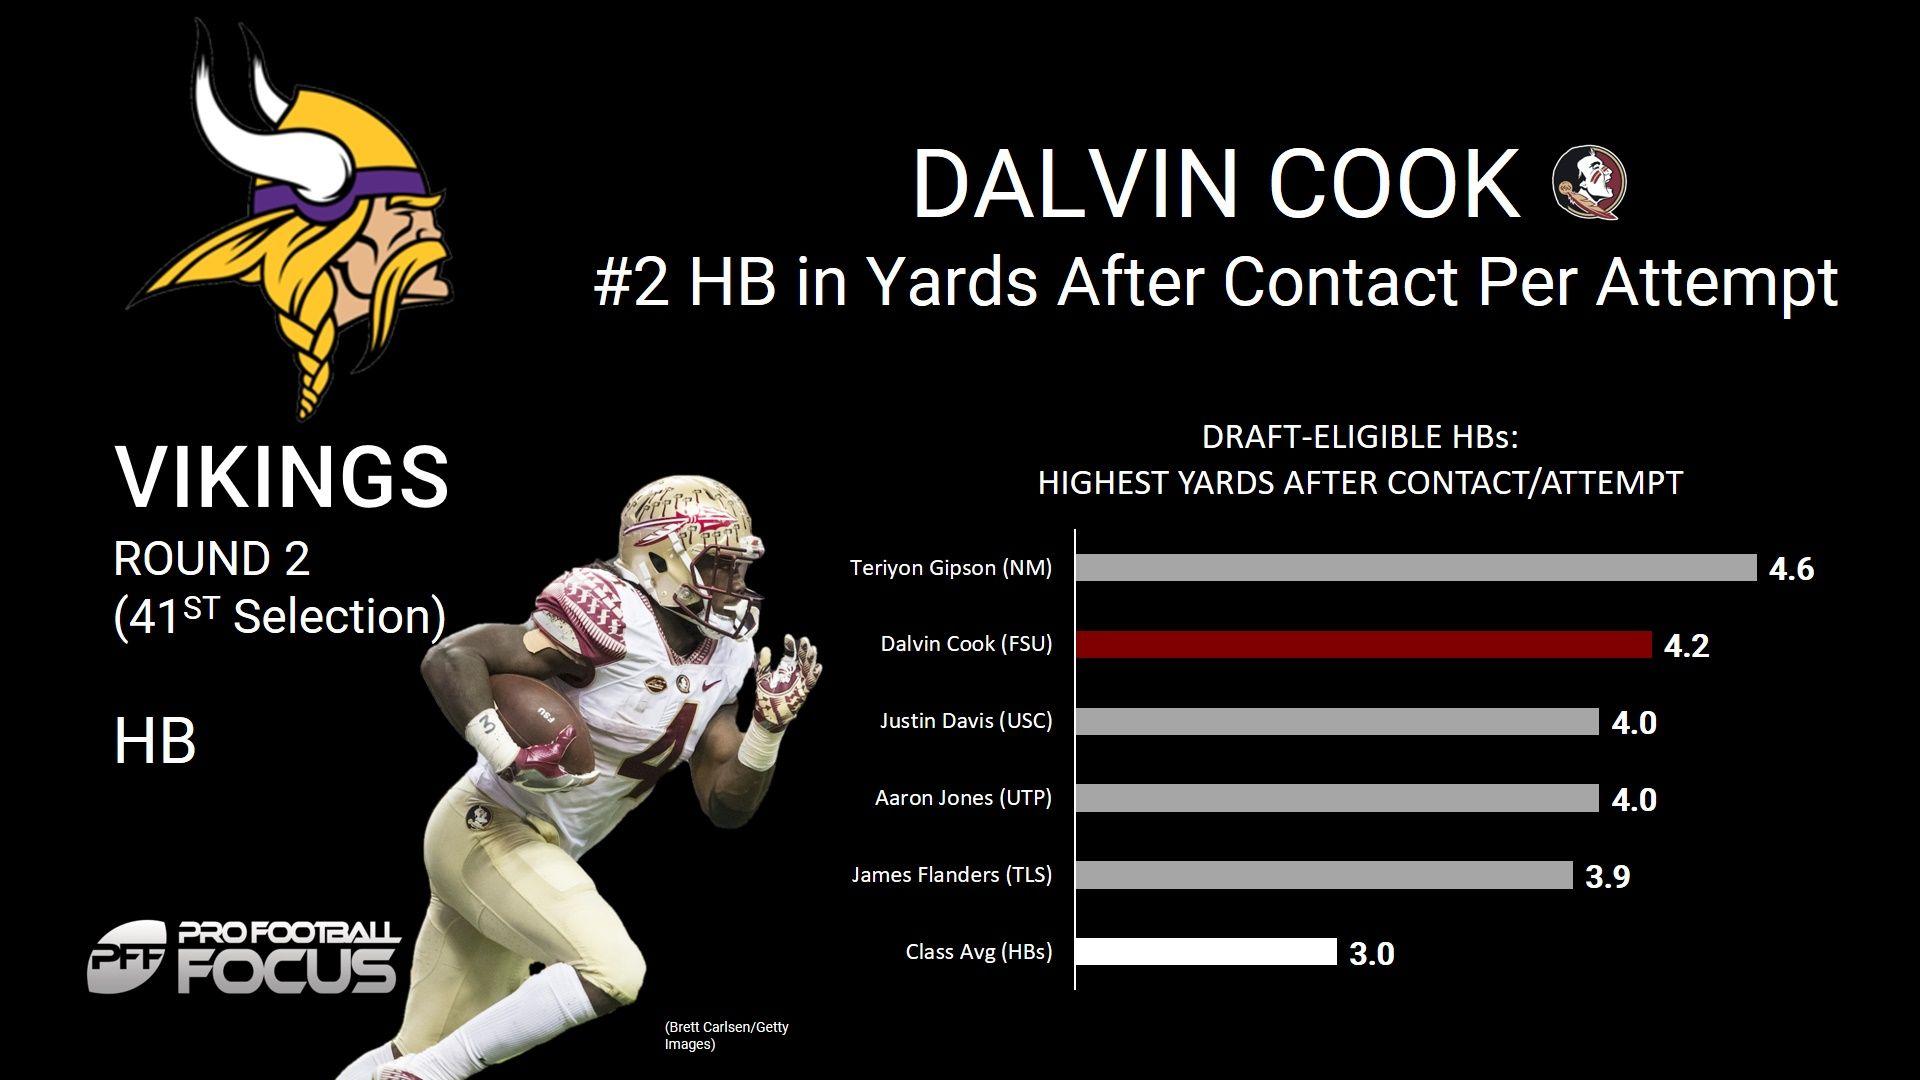 Dalvin Cook finally gets drafted, heads to Minnesota. NFL Draft